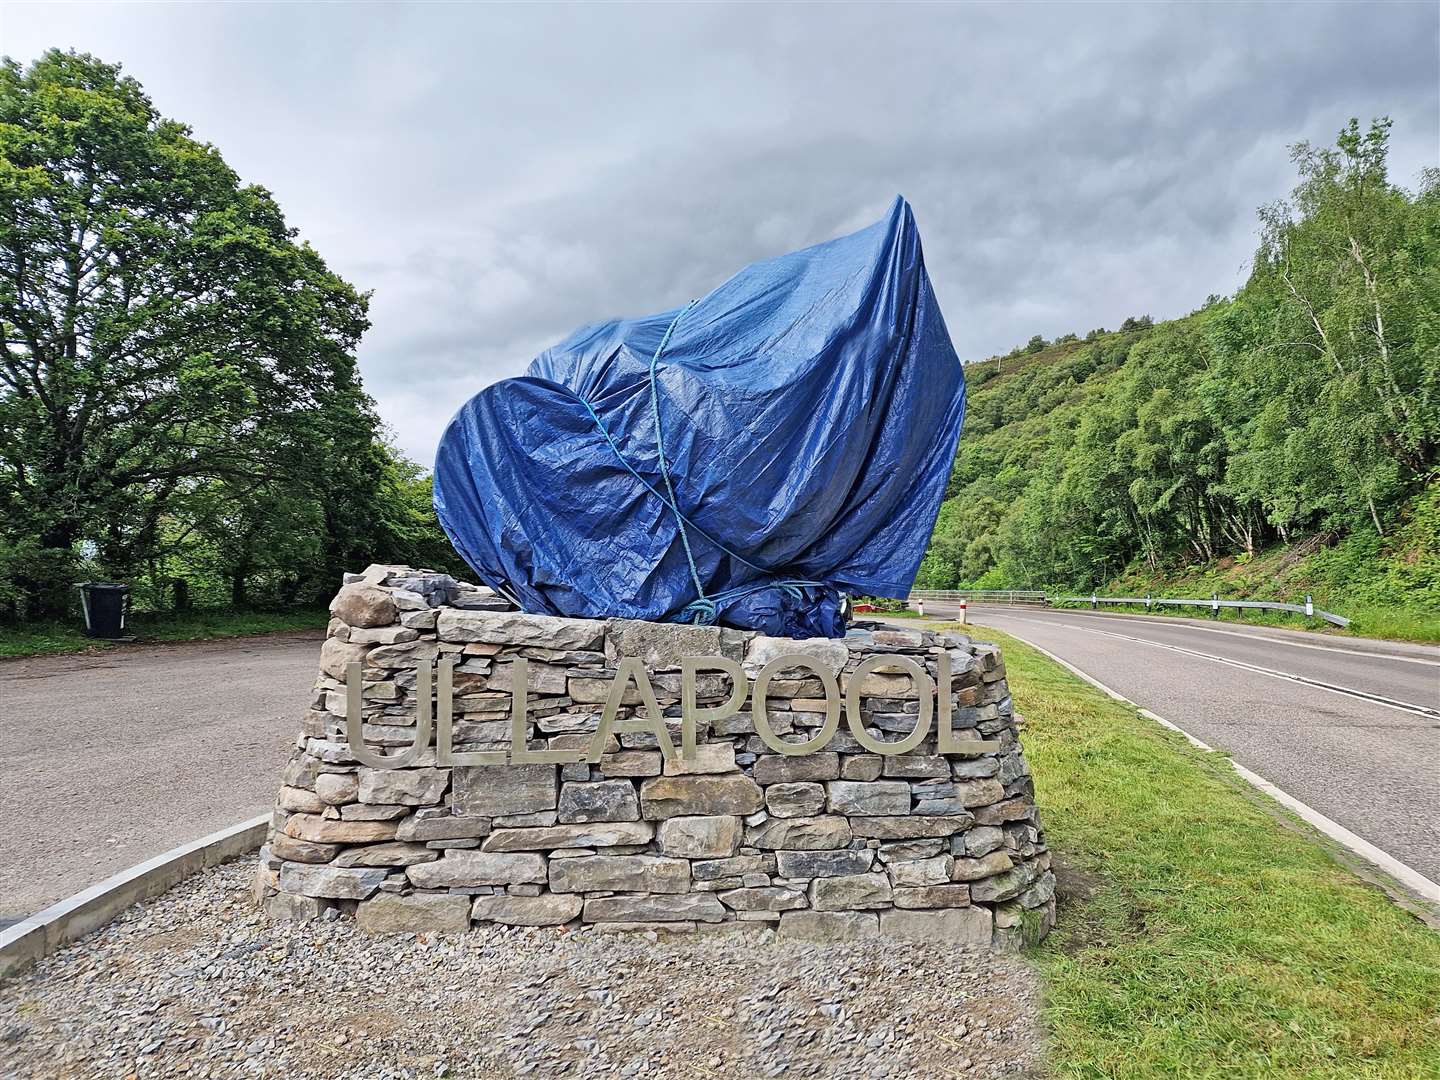 The big reveal of Ullapool's entrance sign is scheduled for Saturday.